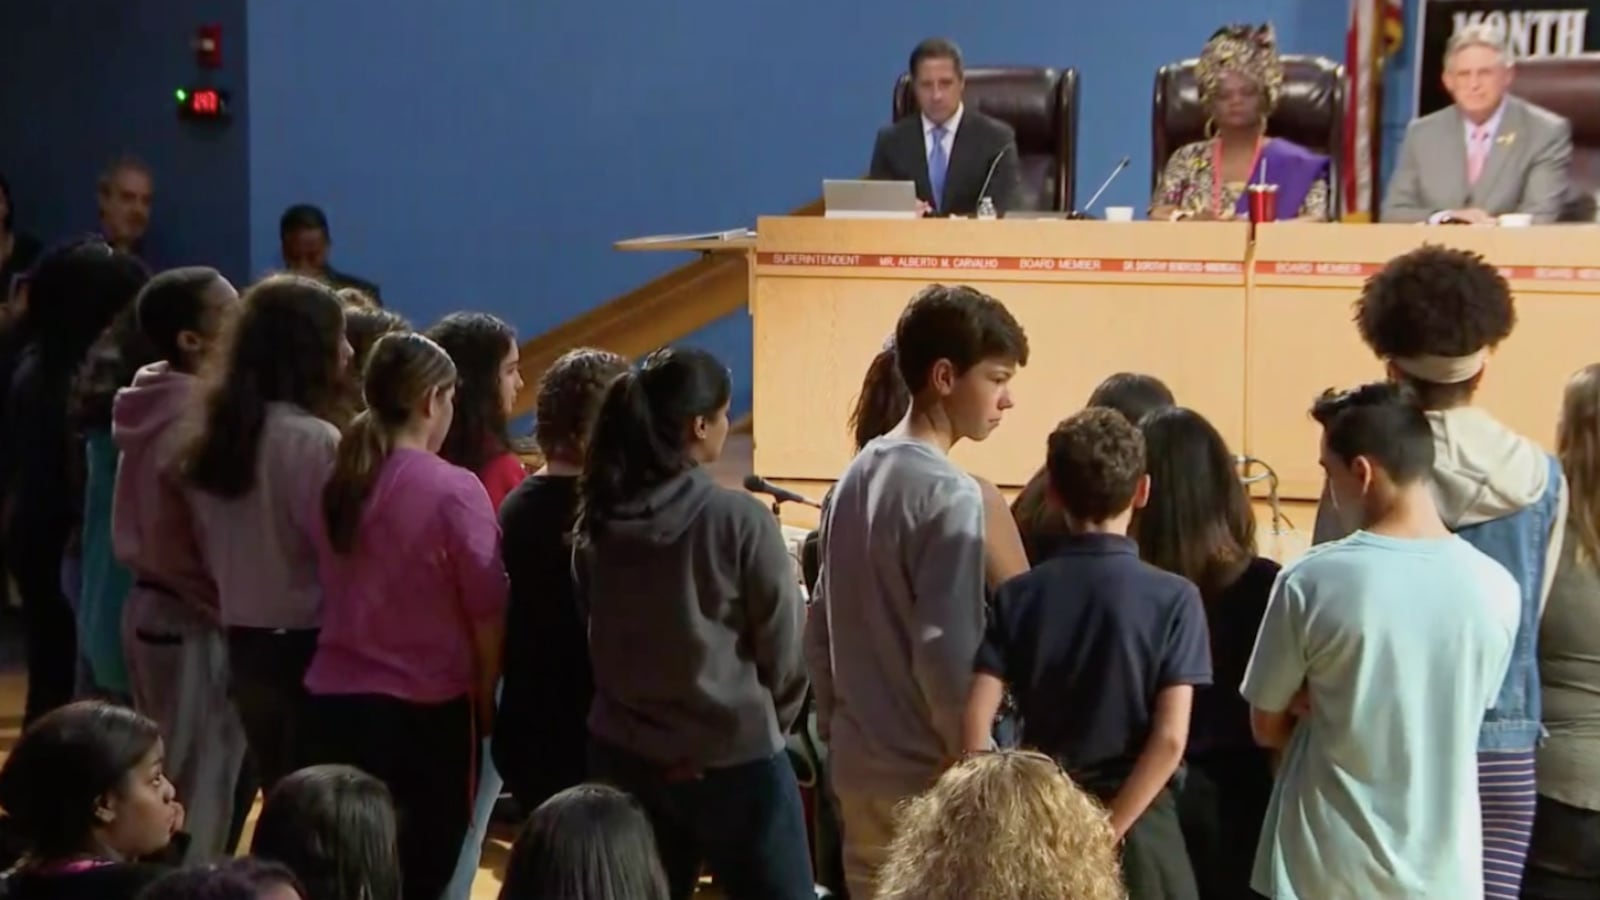 Students from Miami's iPrep, where Superintendent Alberto Carvalho also serves as principal, asked him to stay in Miami at a March 1st board meeting.